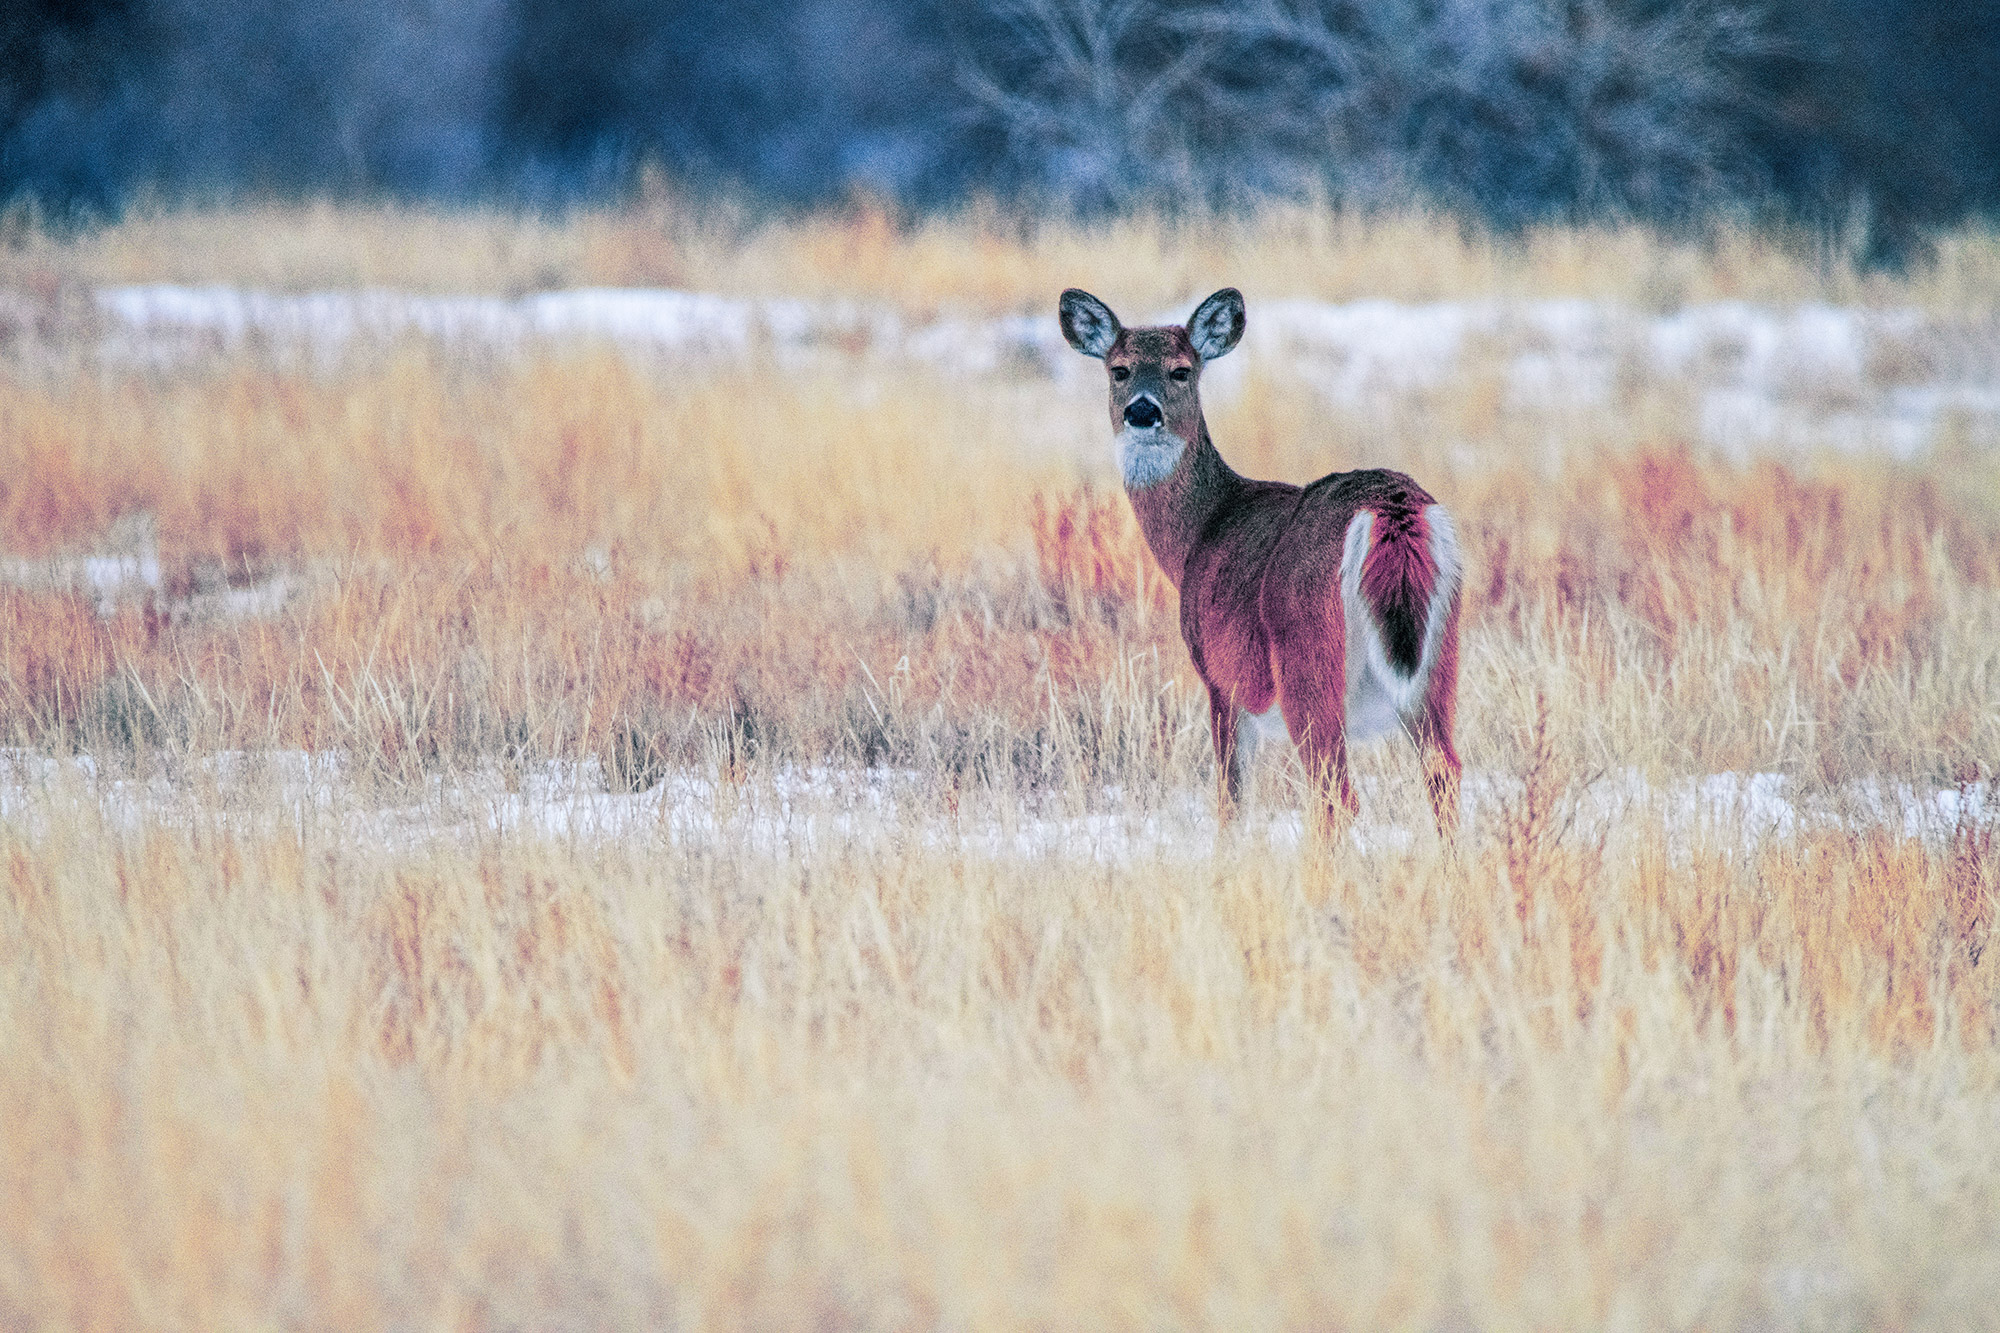 White Tailed Deer Gazing Backwards Among Snowy Field (Color Photo)